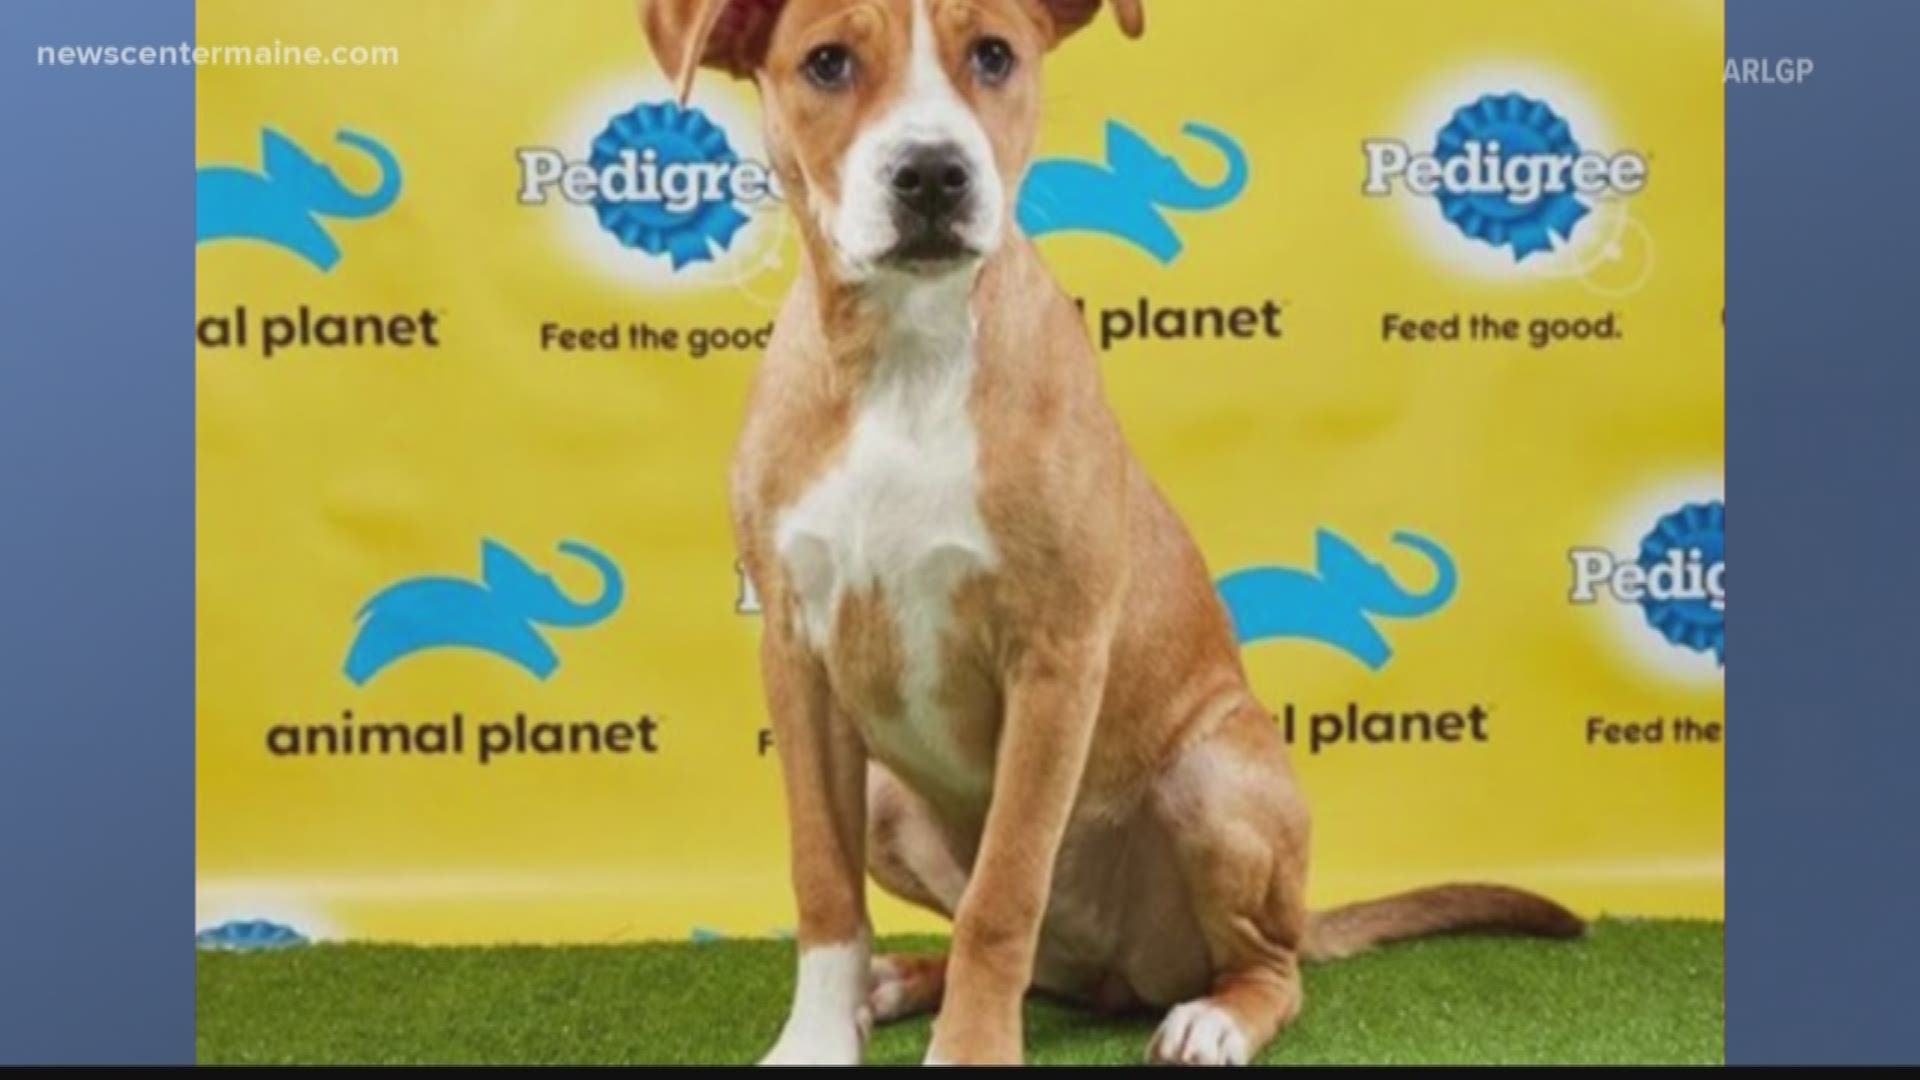 Maine puppy to compete in Animal Planet's Puppy Bowl